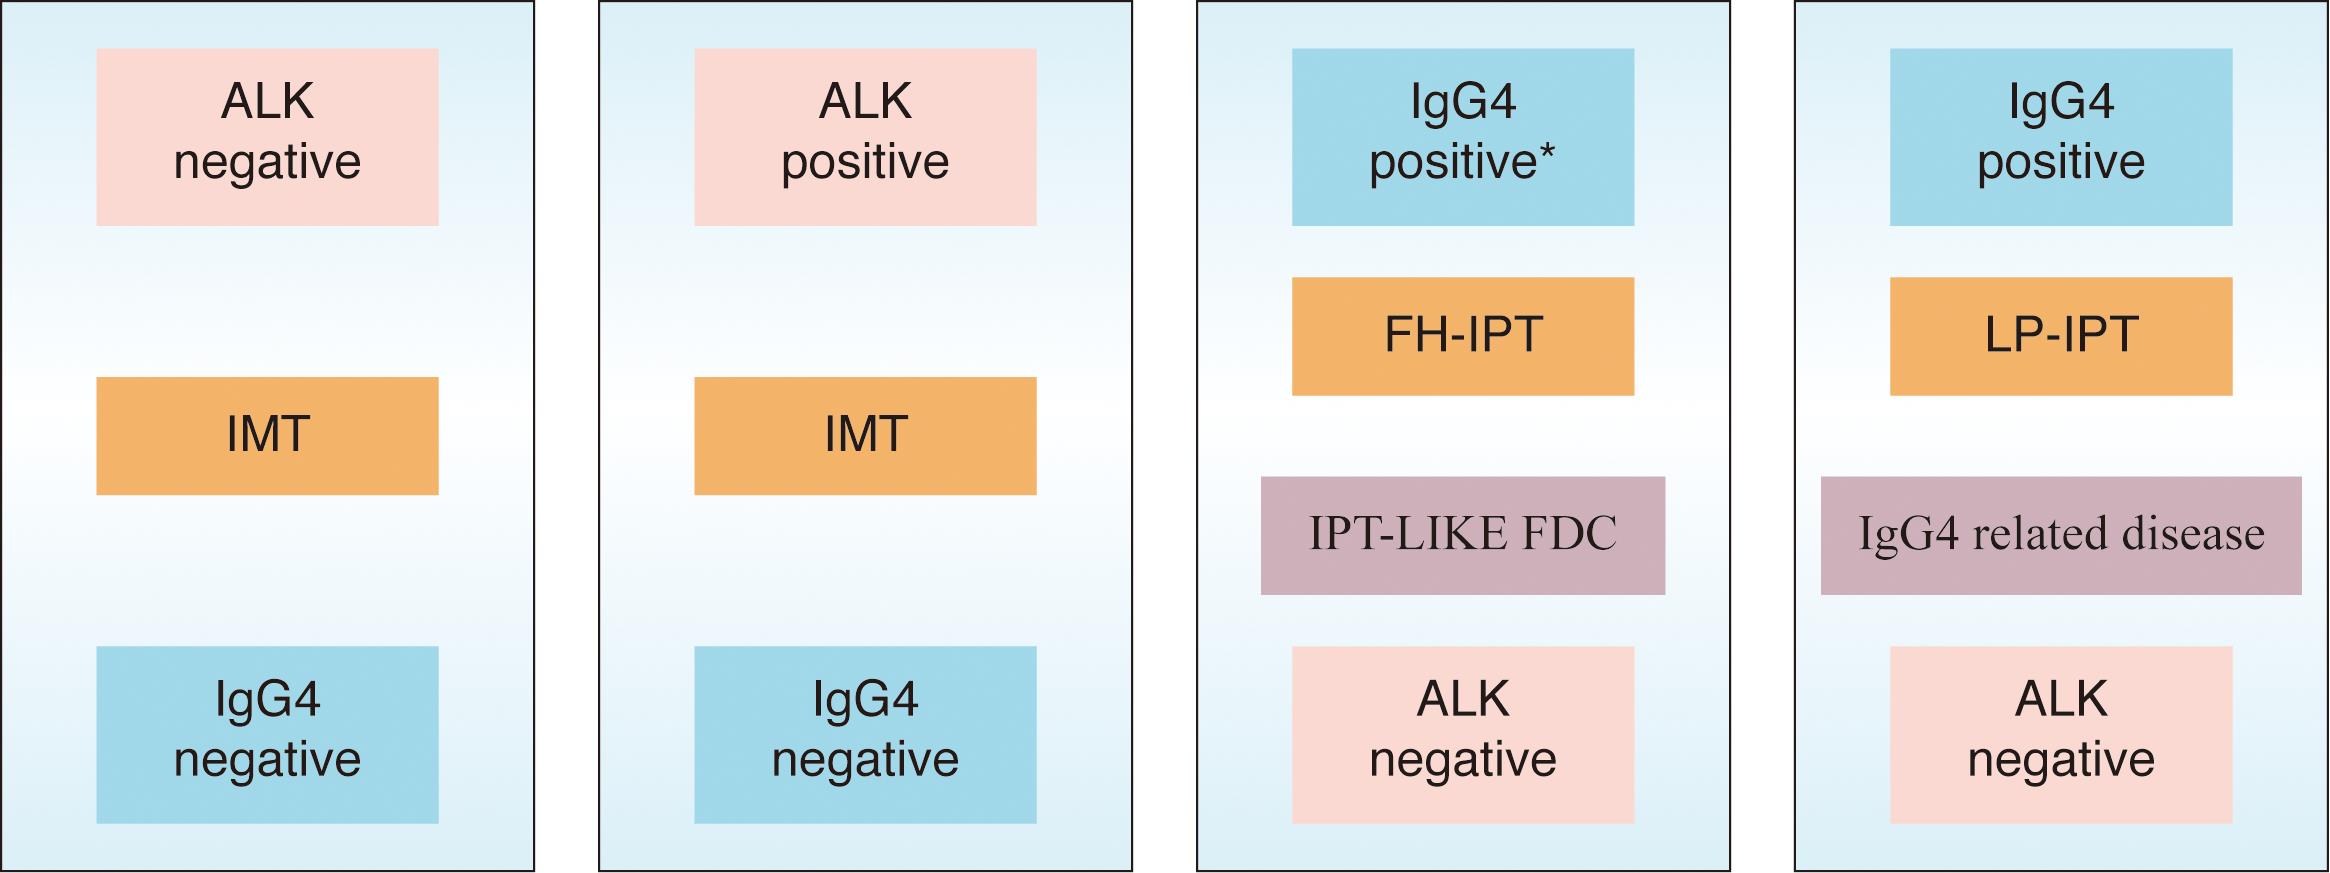 Although IMT formerly diagnosed as IPT, the expression of ALK and lack of IgG4 demonstrate that IMT is a distinctive neoplasm and should be separated from other lesions that are included in the broad category of IPT.